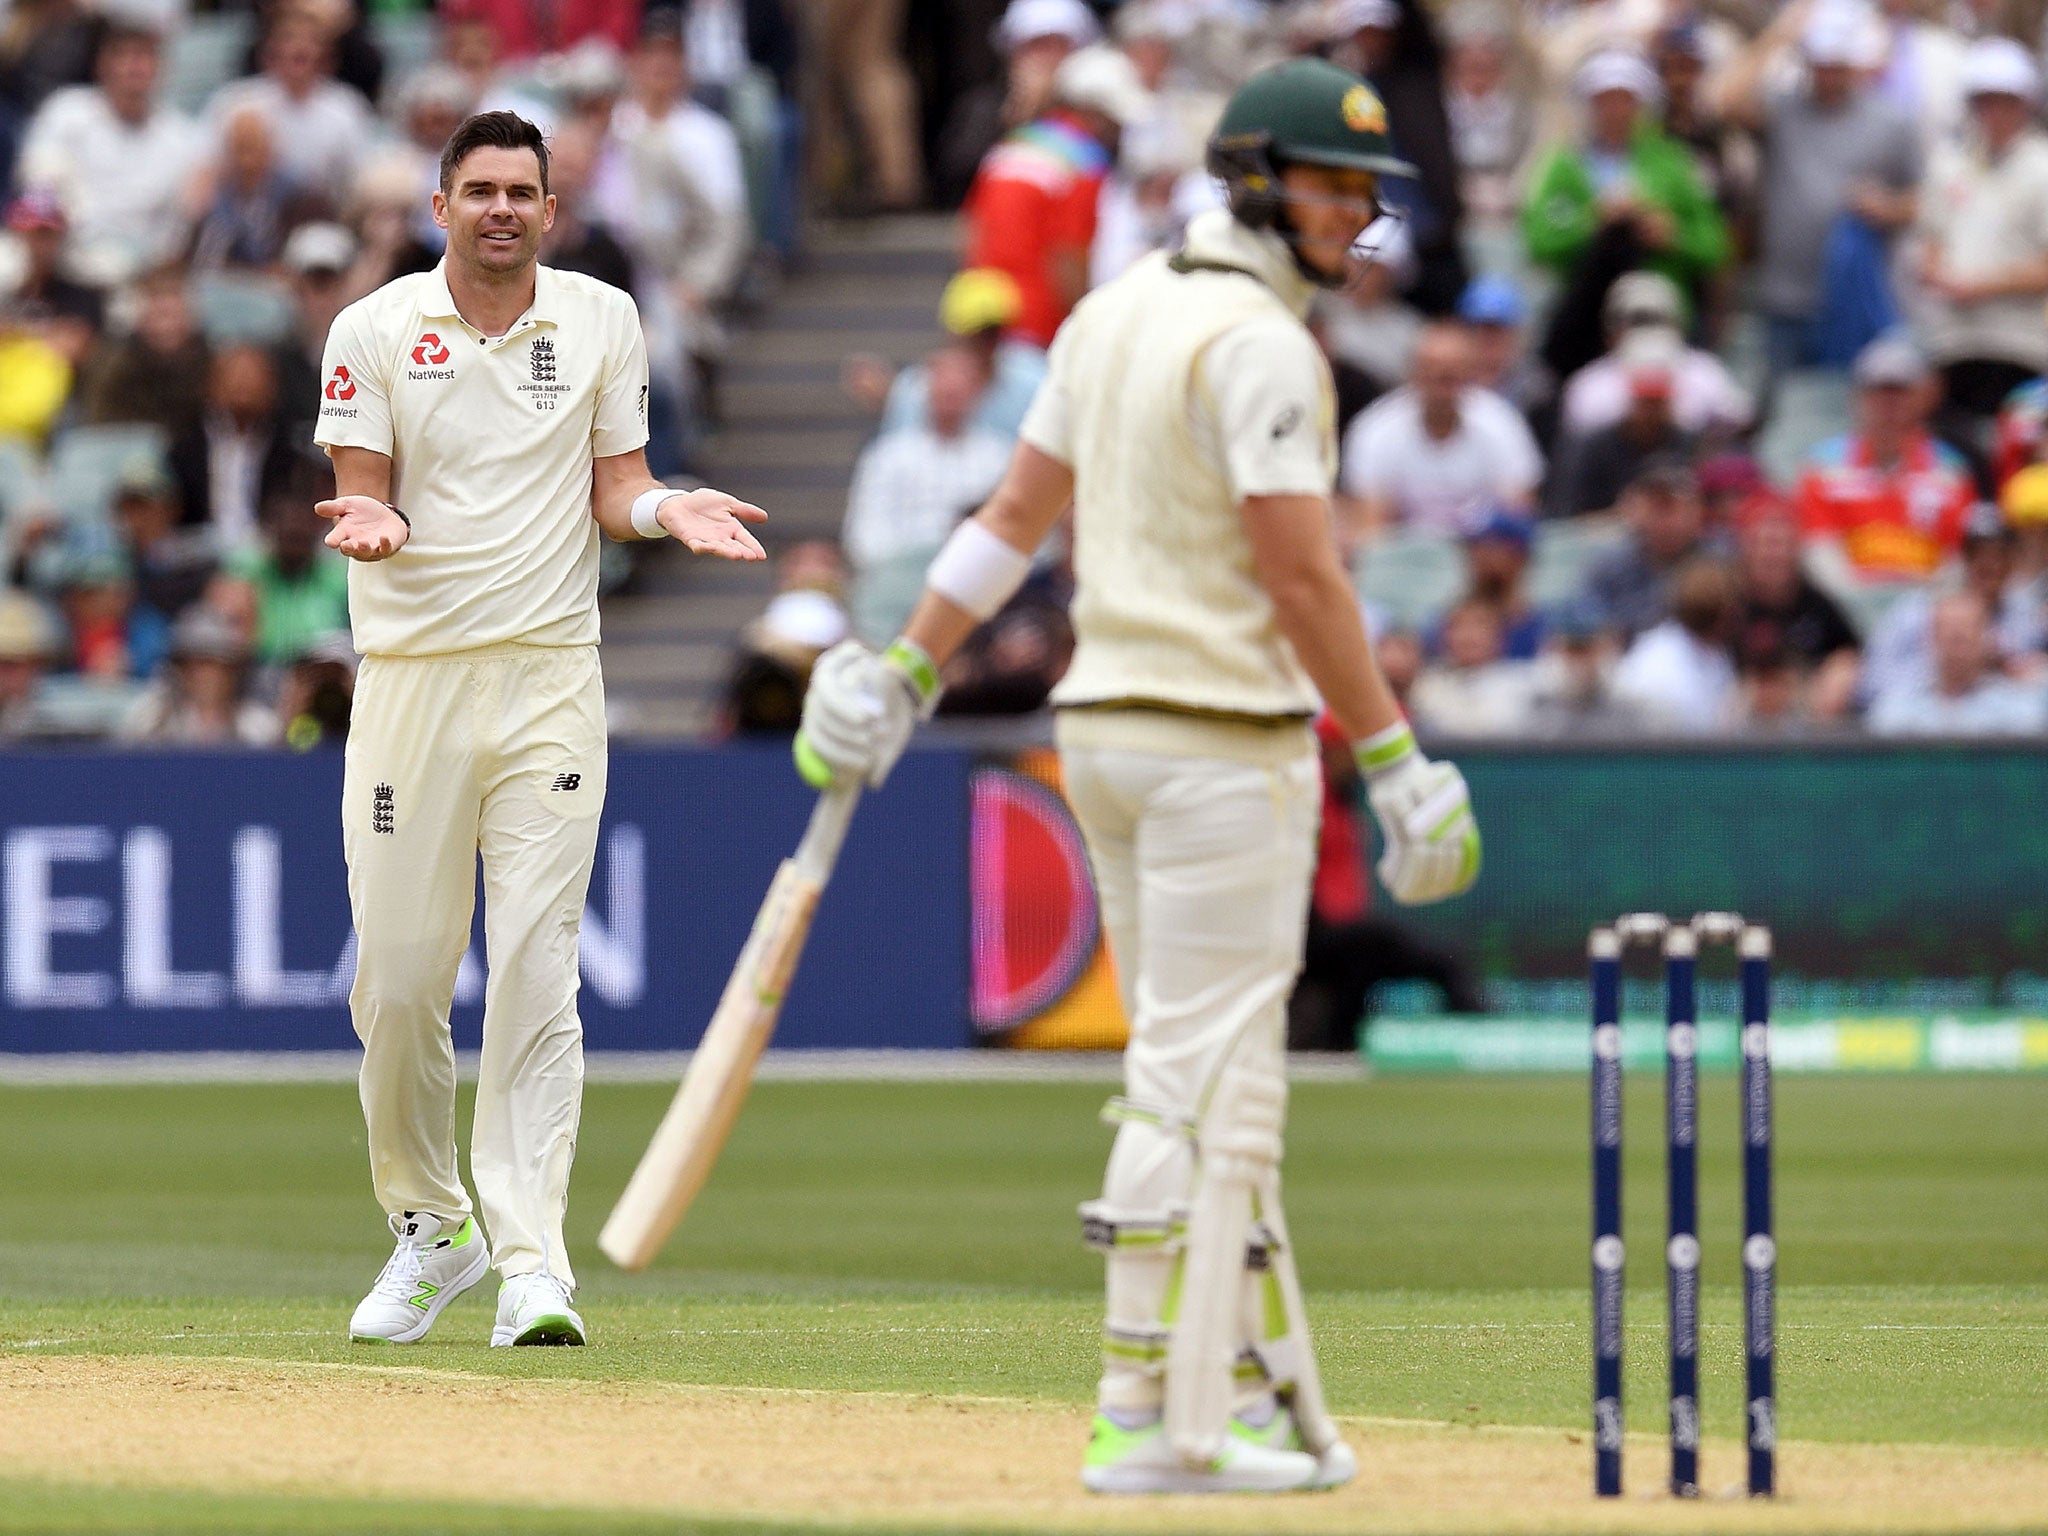 James Anderson appeals for an LBW decision against Tim Paine on the second day of the second Test